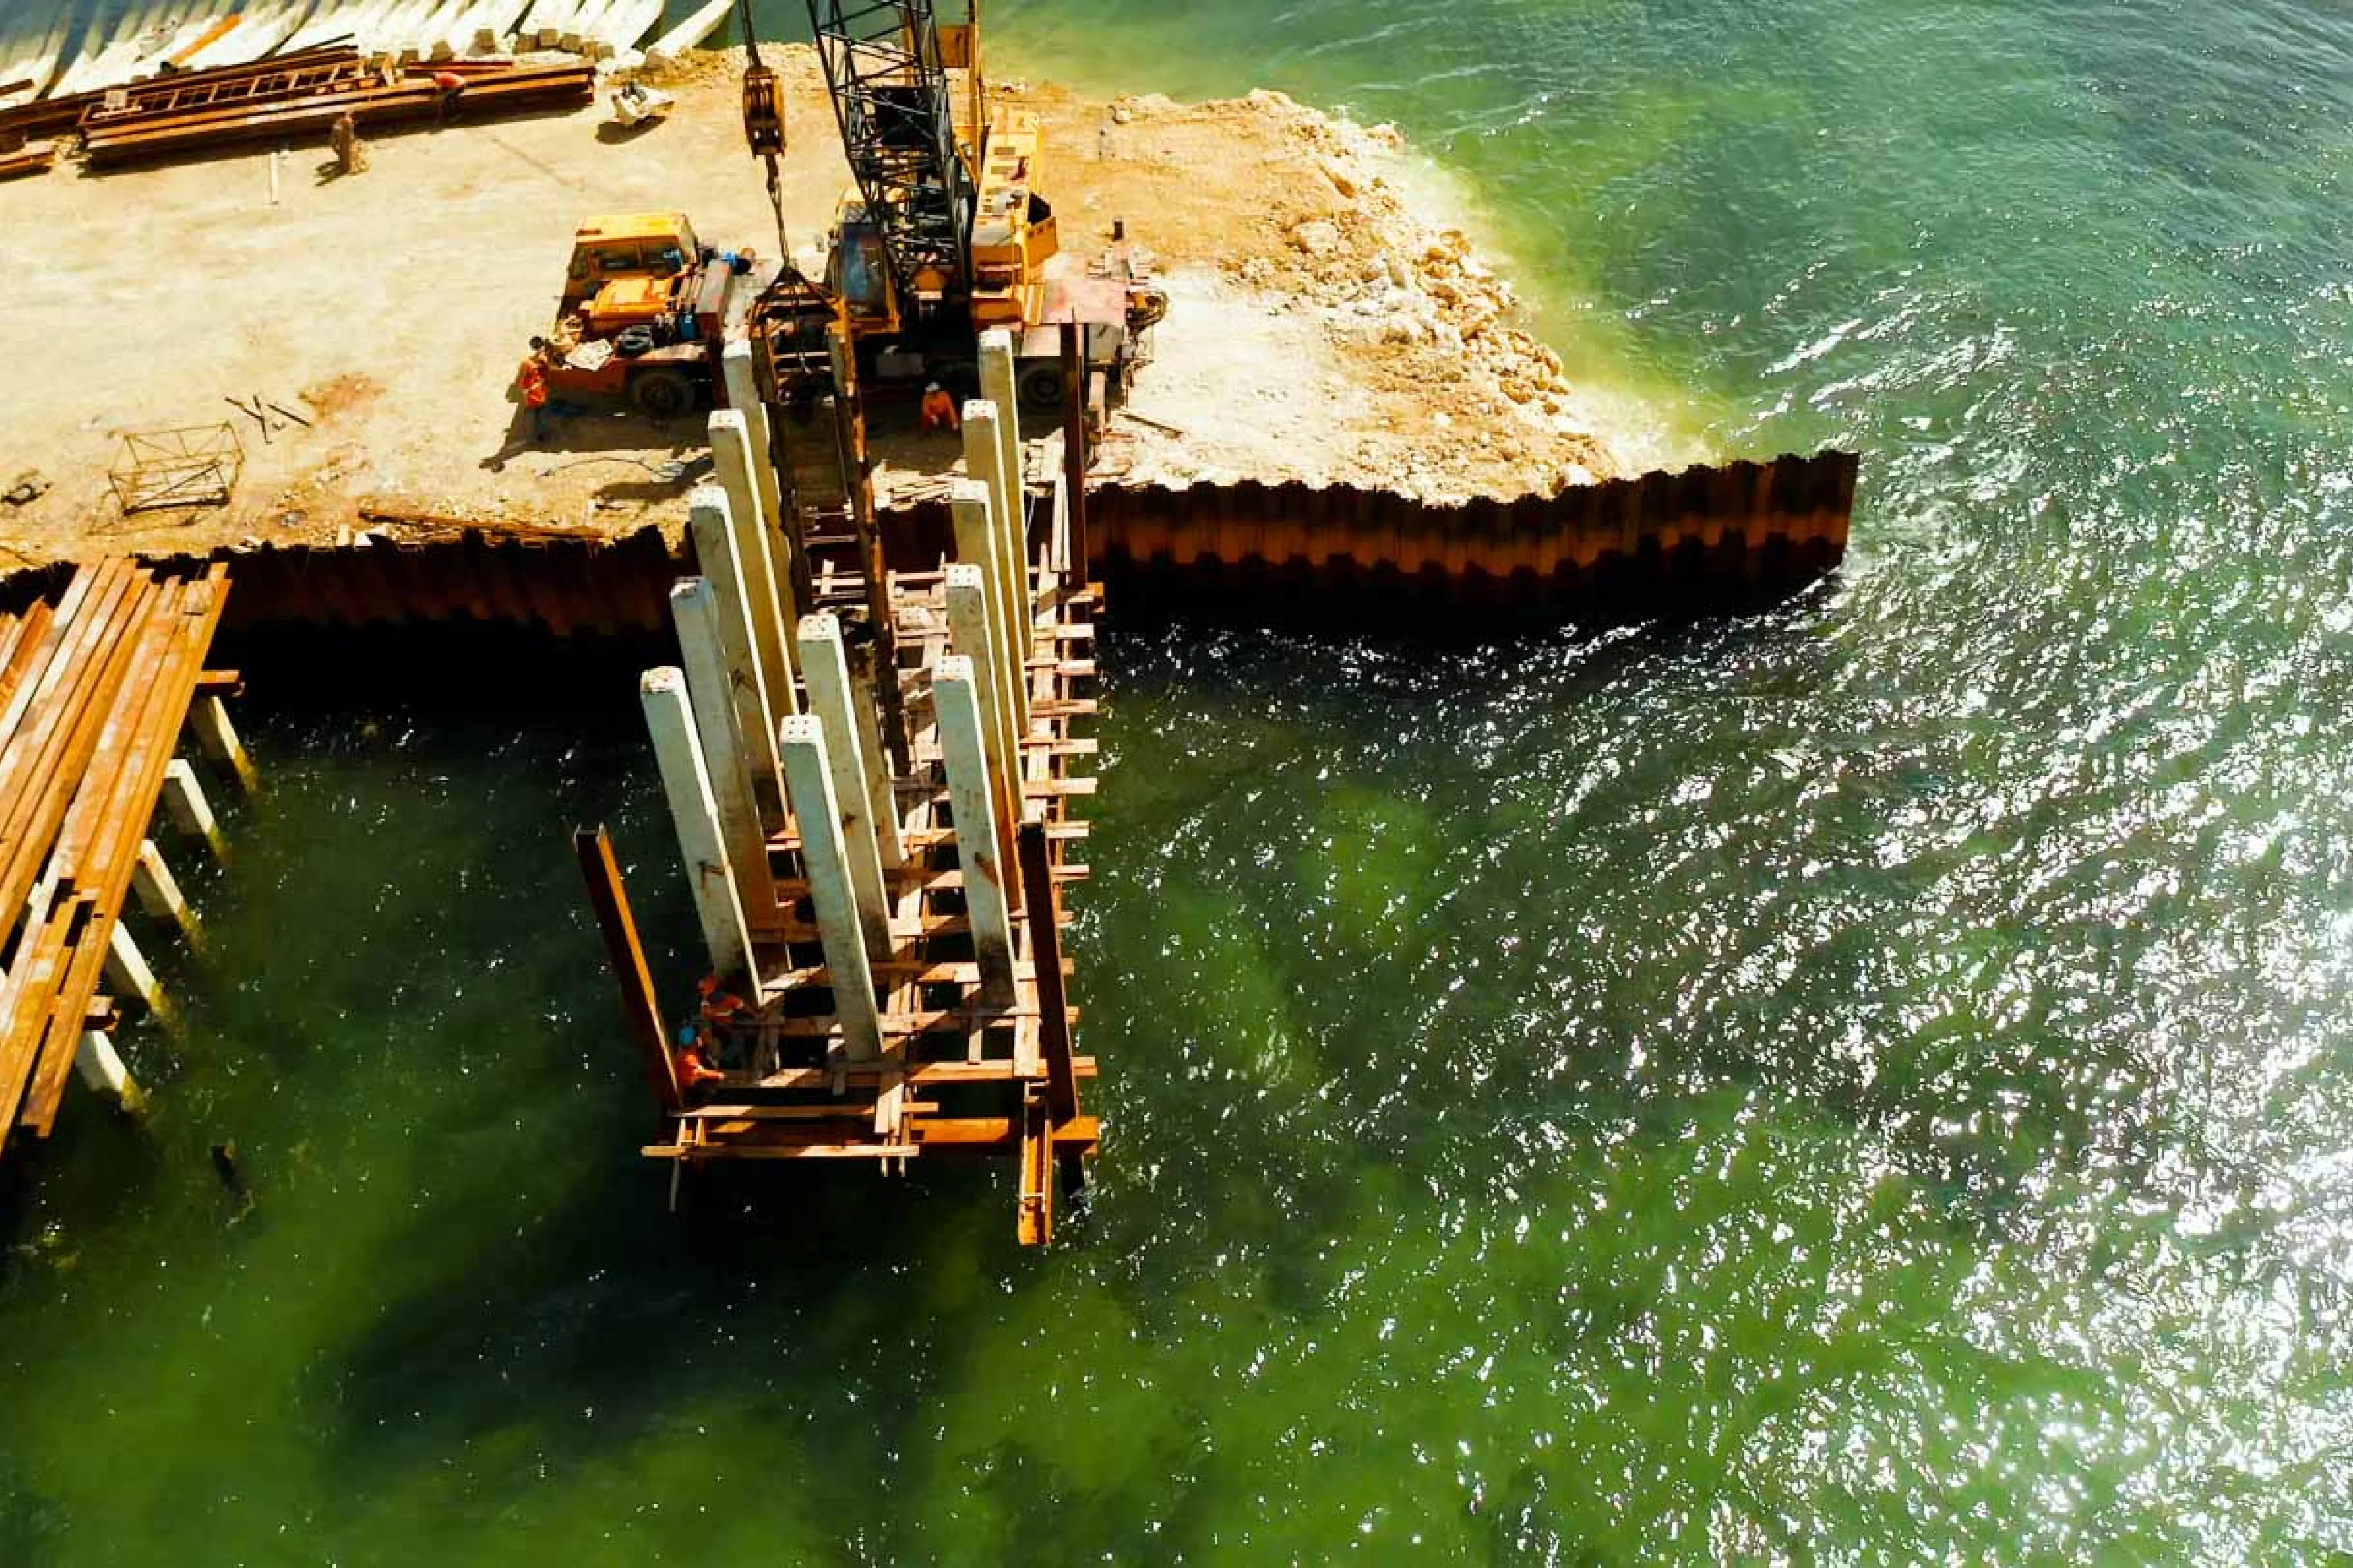 Pile driving pier extends over green water